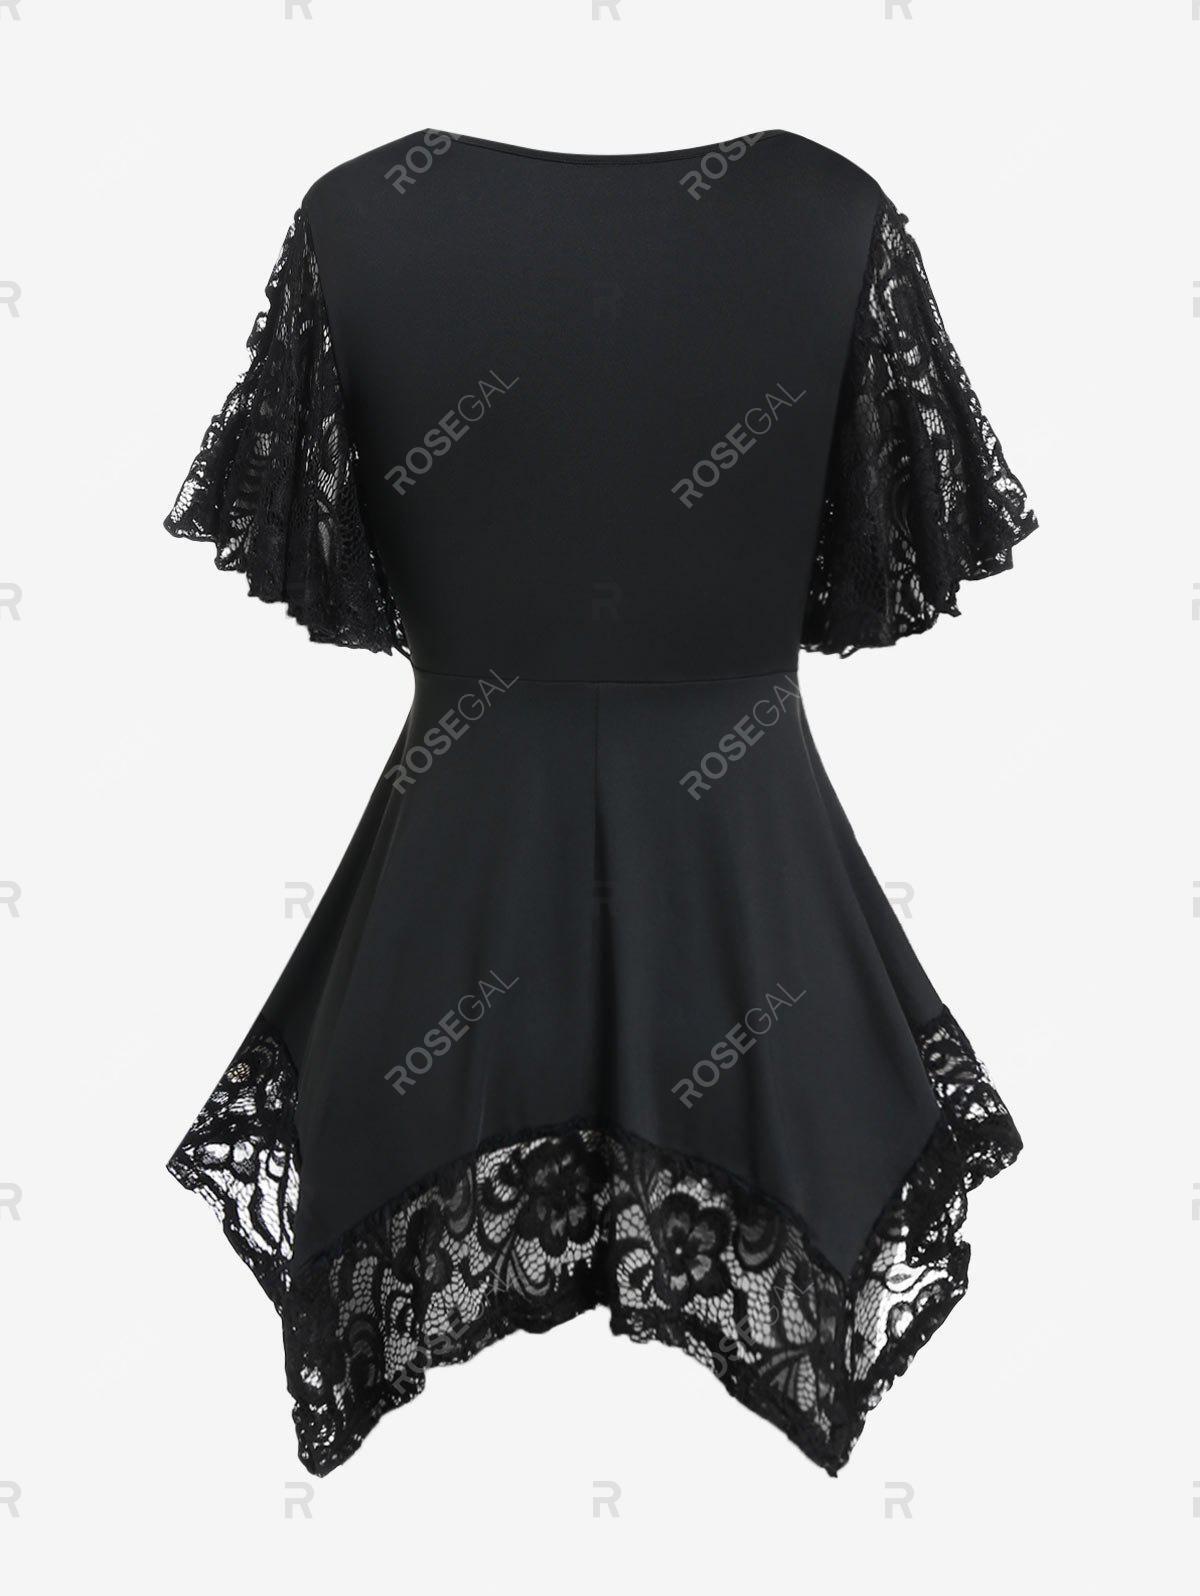 Lace Insert Handkerchief T Shirt and Lace Up Chains Gothic Capri Pants Plus Size Summer Outfit